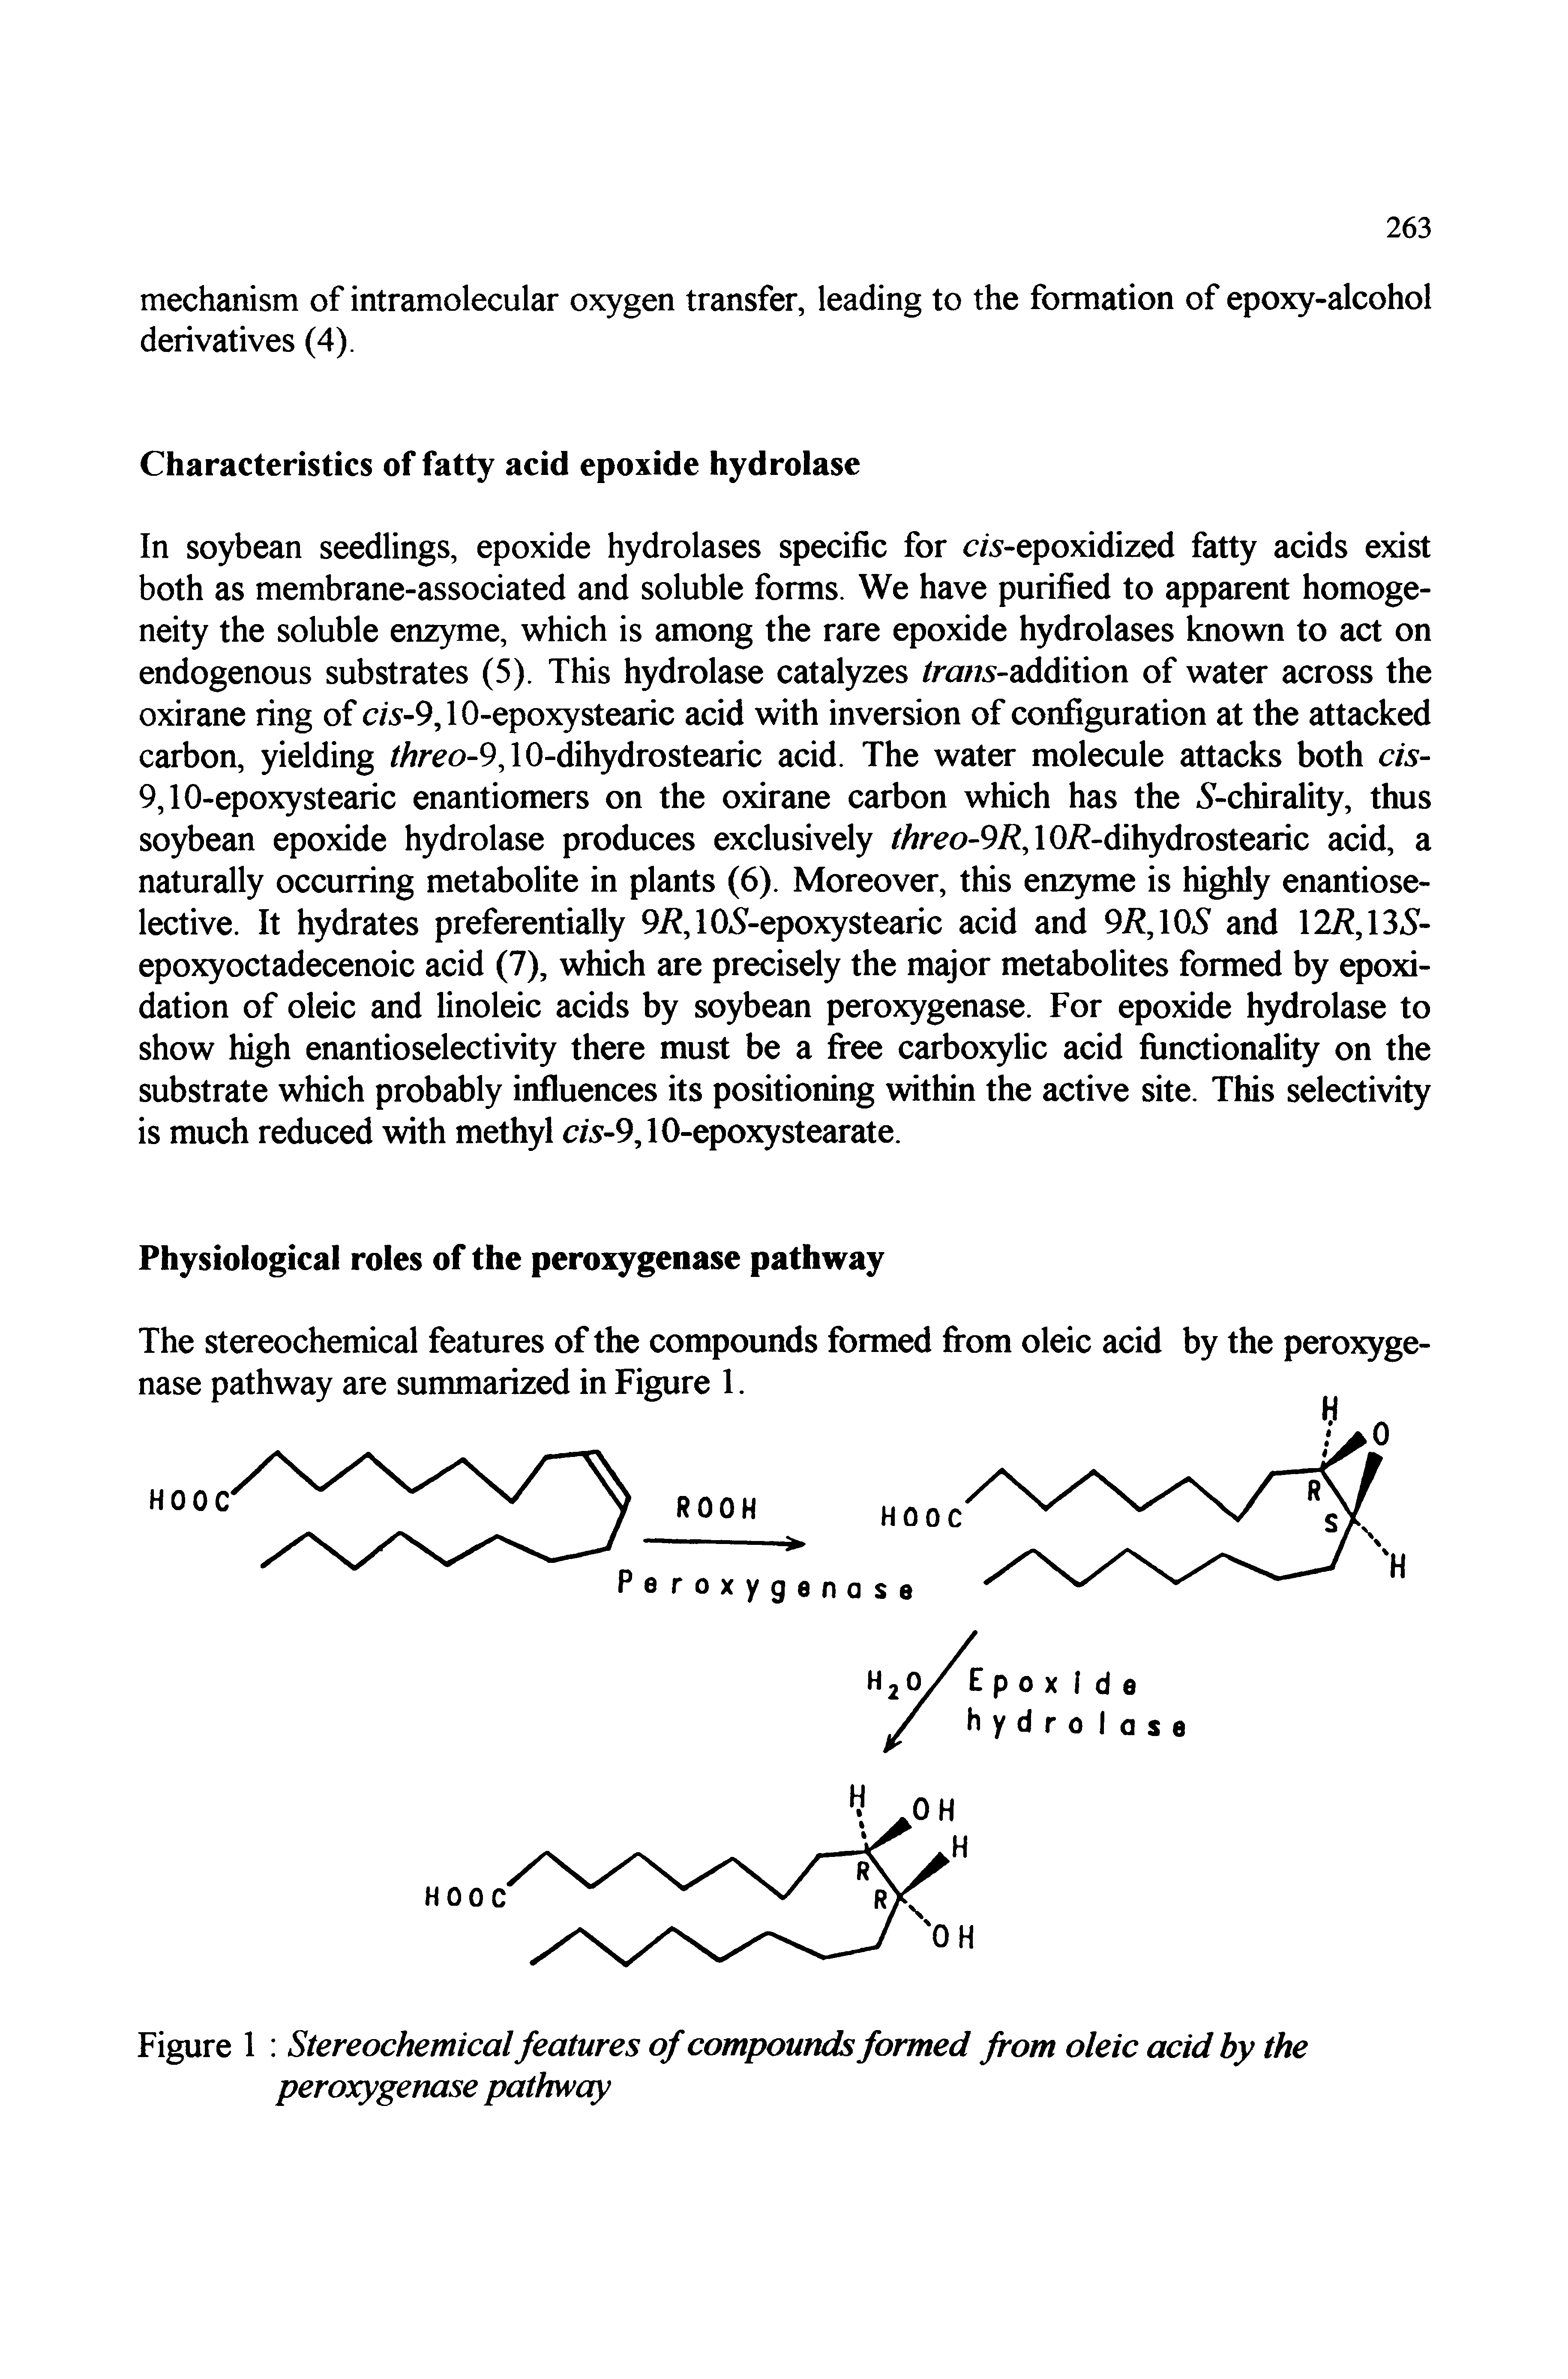 Figure 1 Stereochemical features of compounds formed from oleic acid by the peroxygenase pathway...